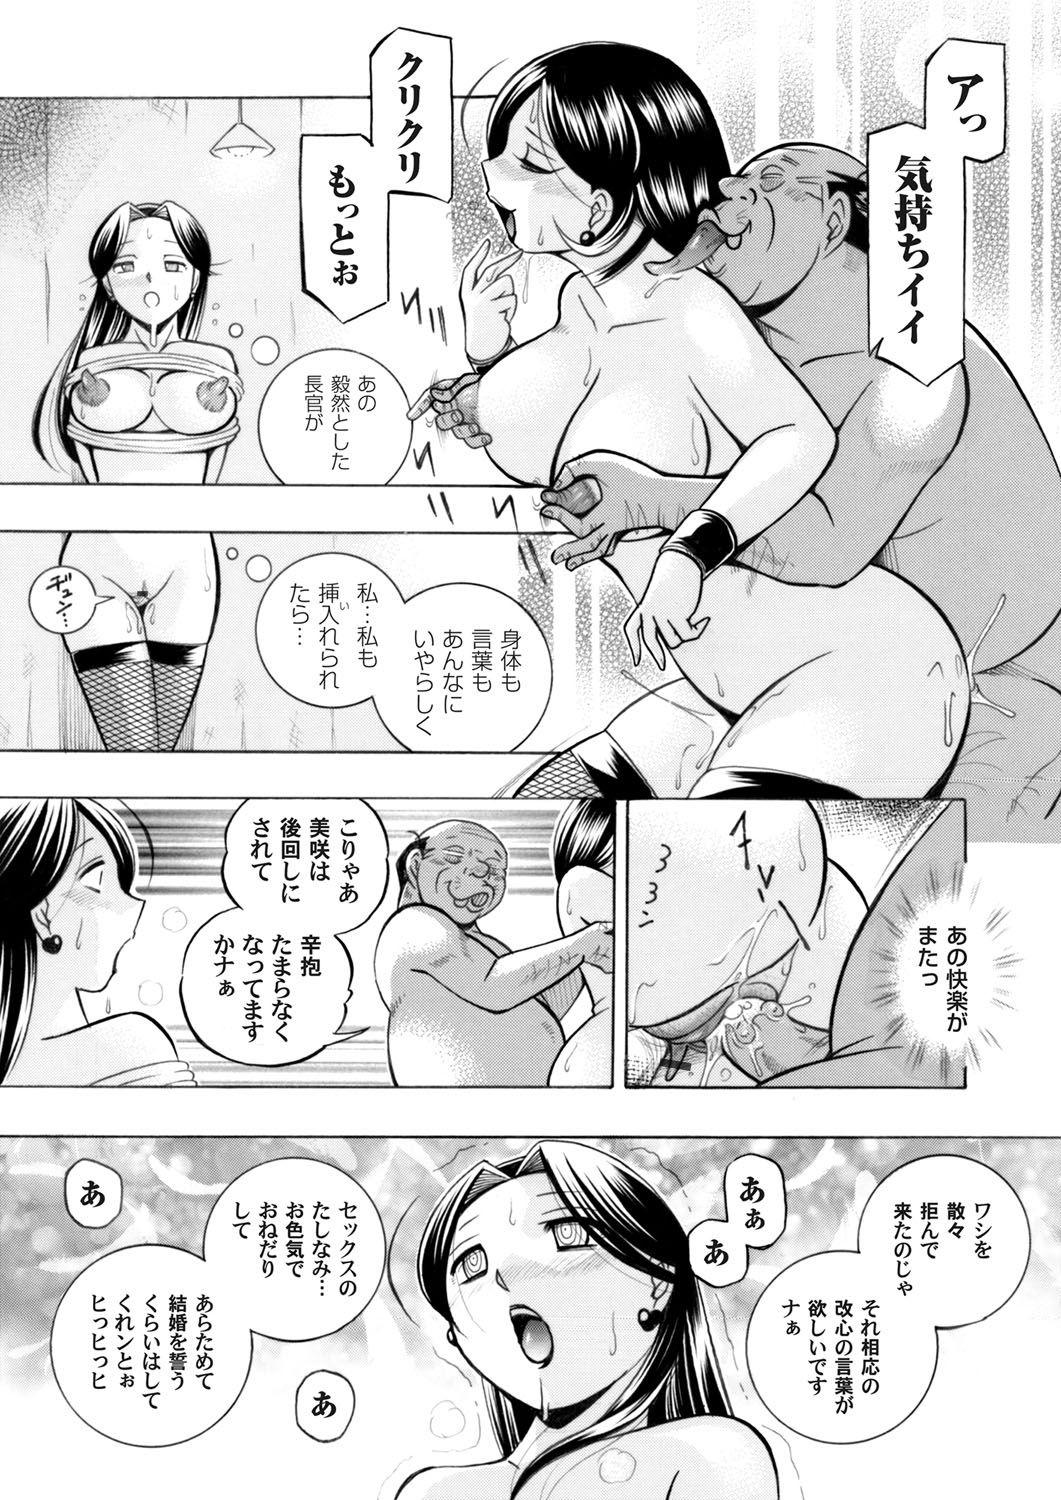 Stockings COMIC Magnum Vol. 61 Asia - Page 4